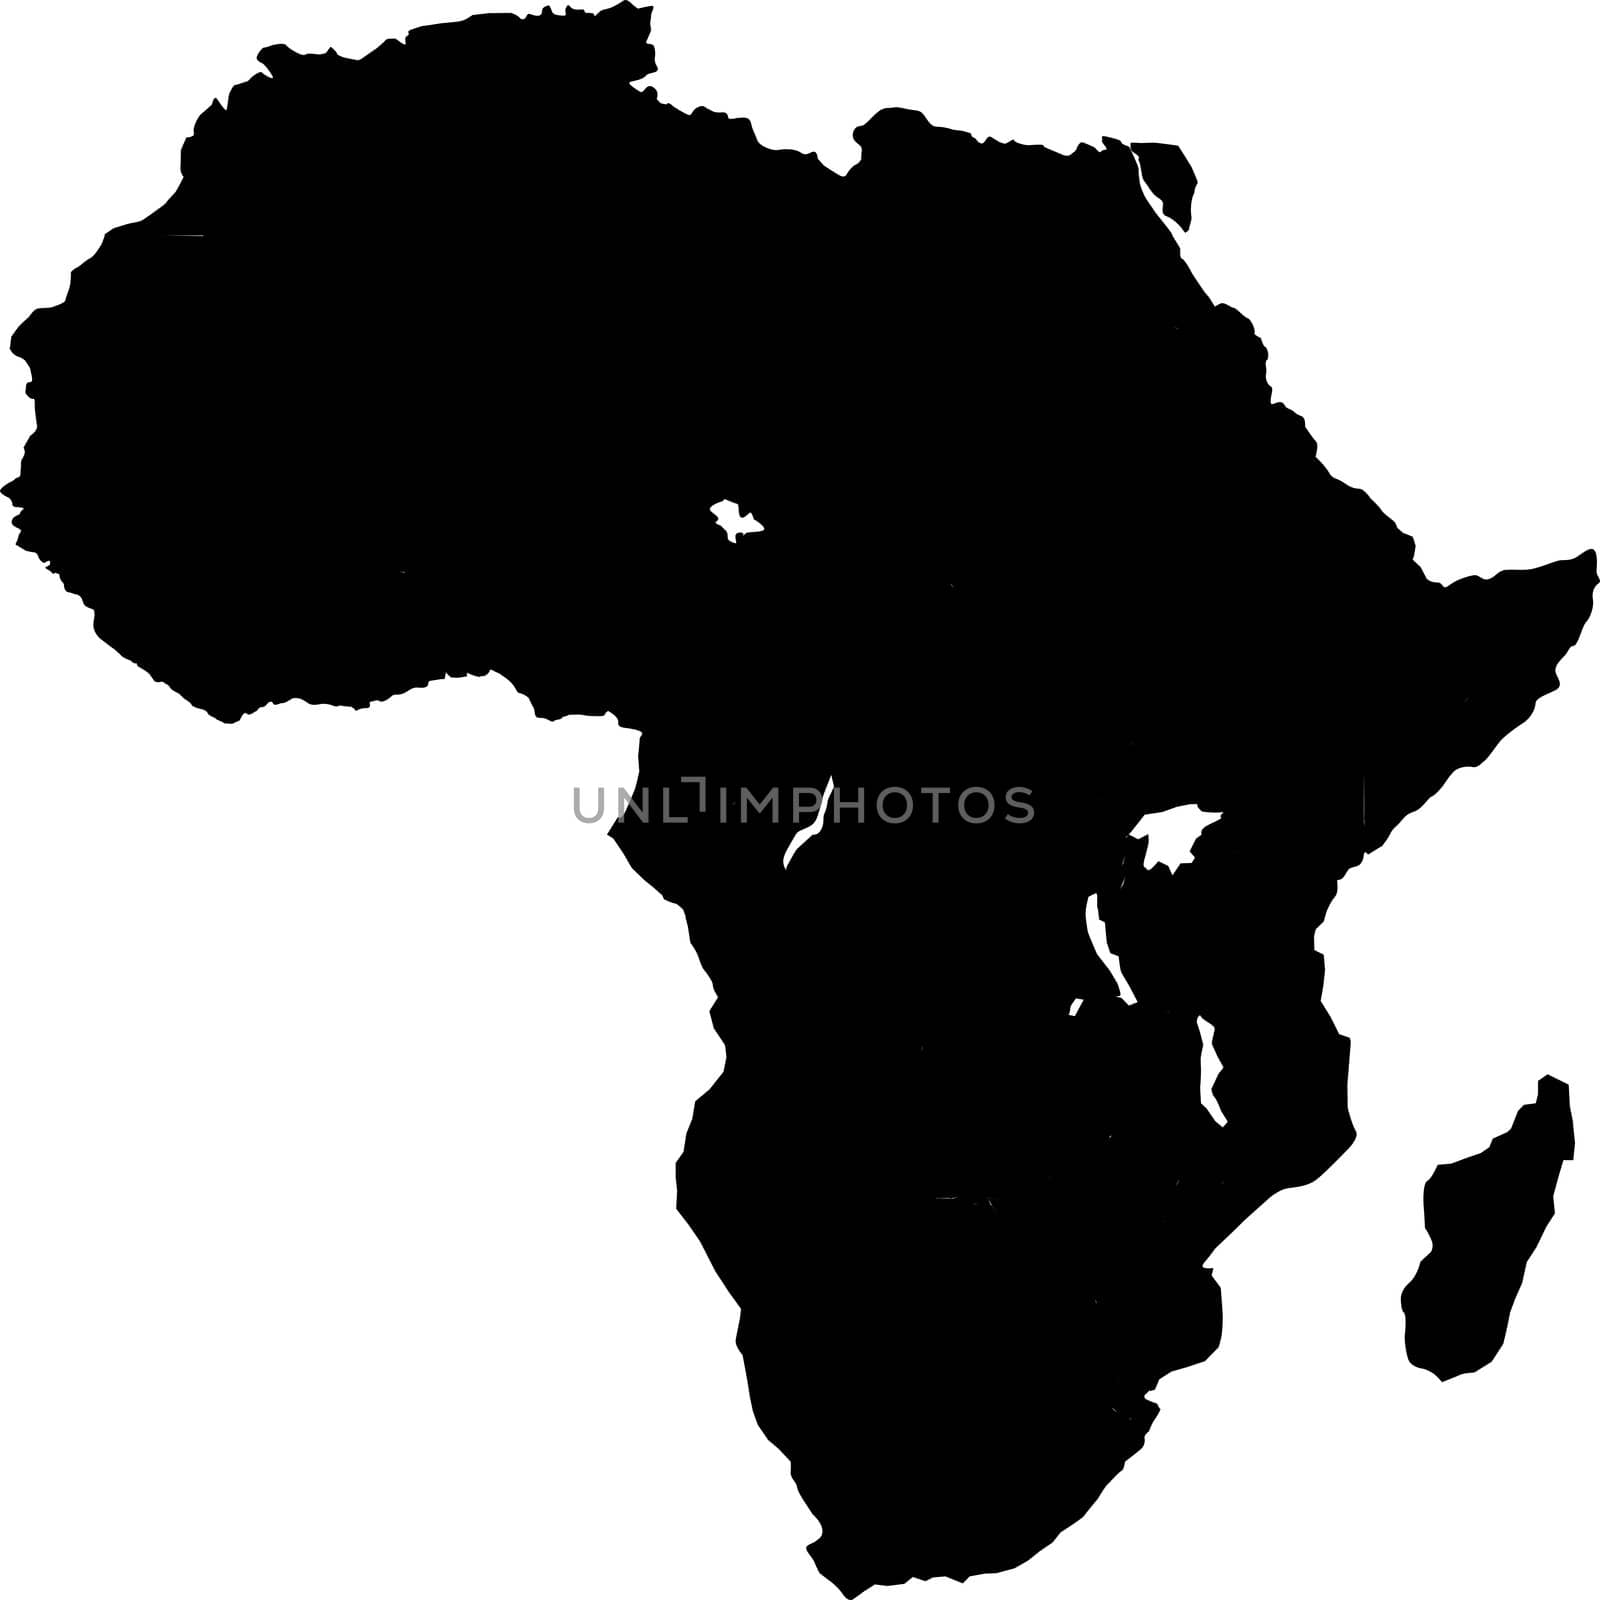 Africa Map by tony4urban